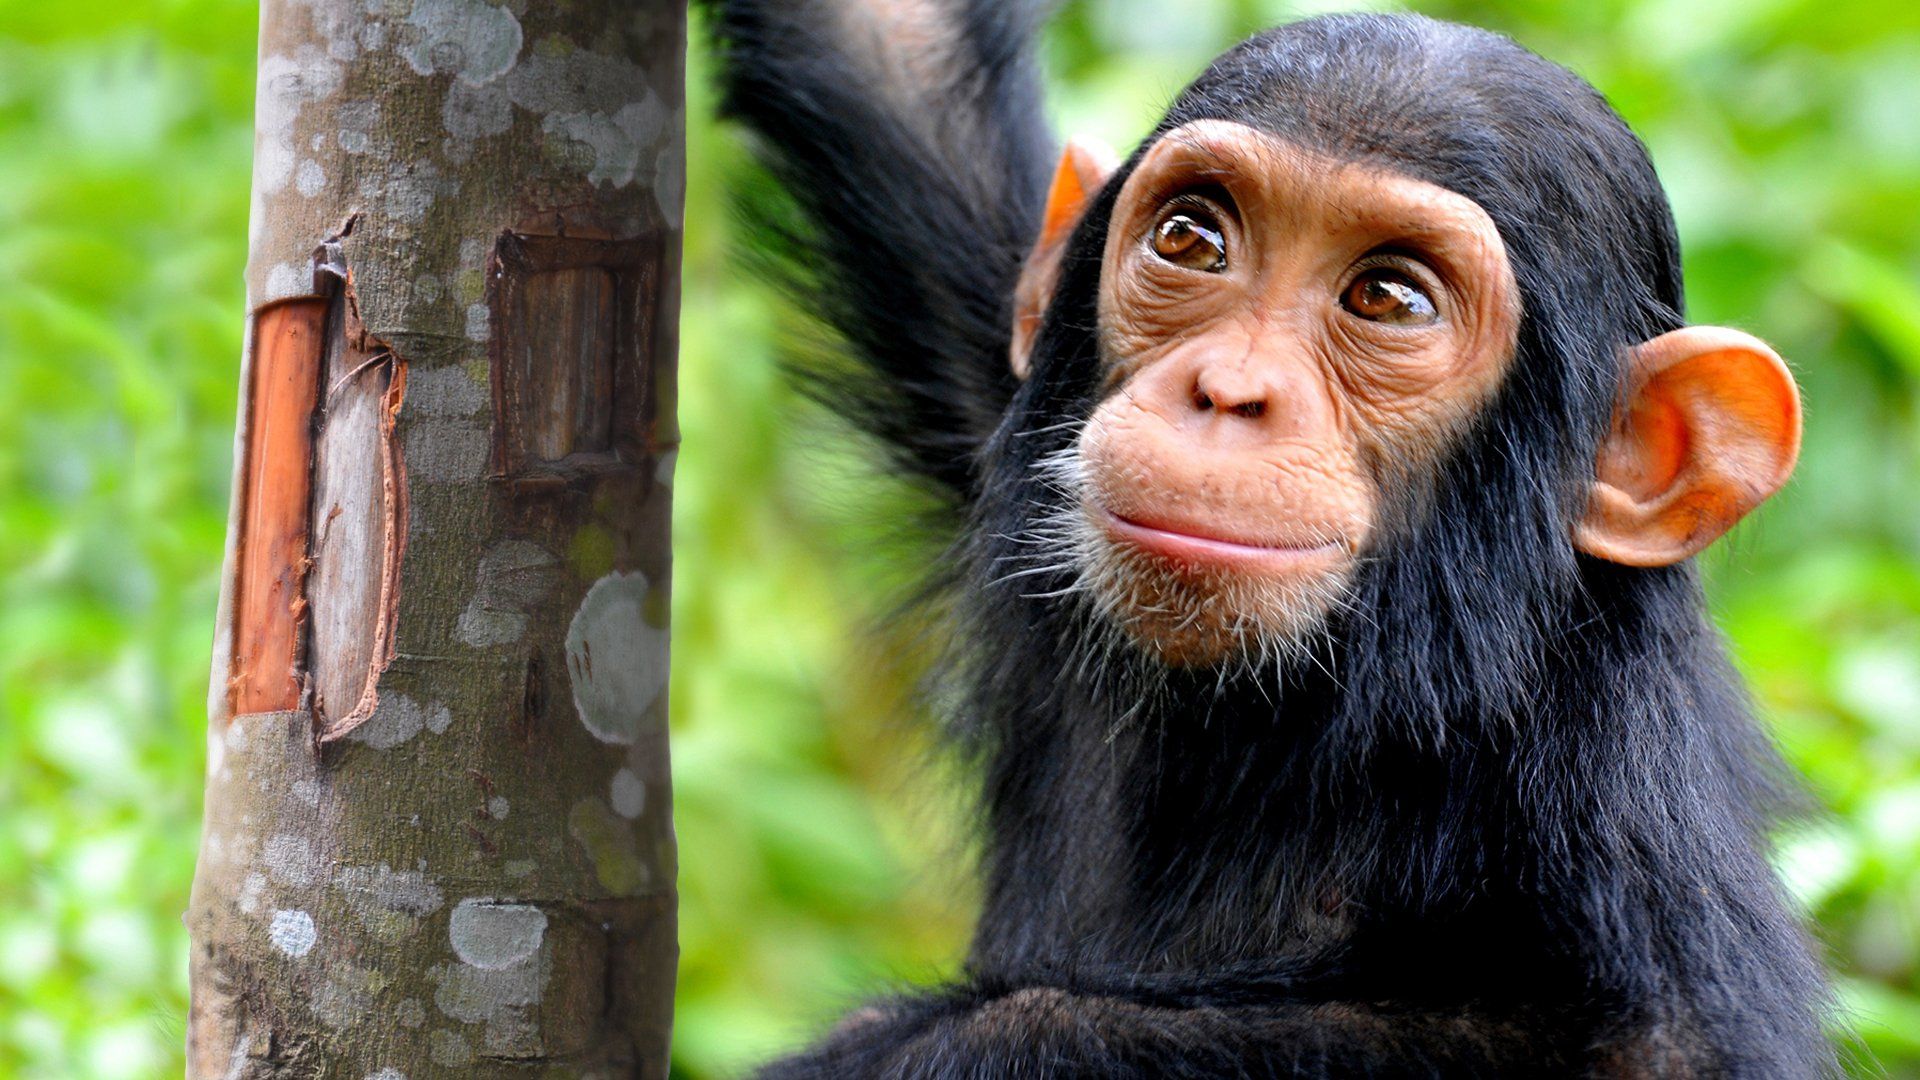 Humans are Driving Chimpanzee Culture Out of Existence